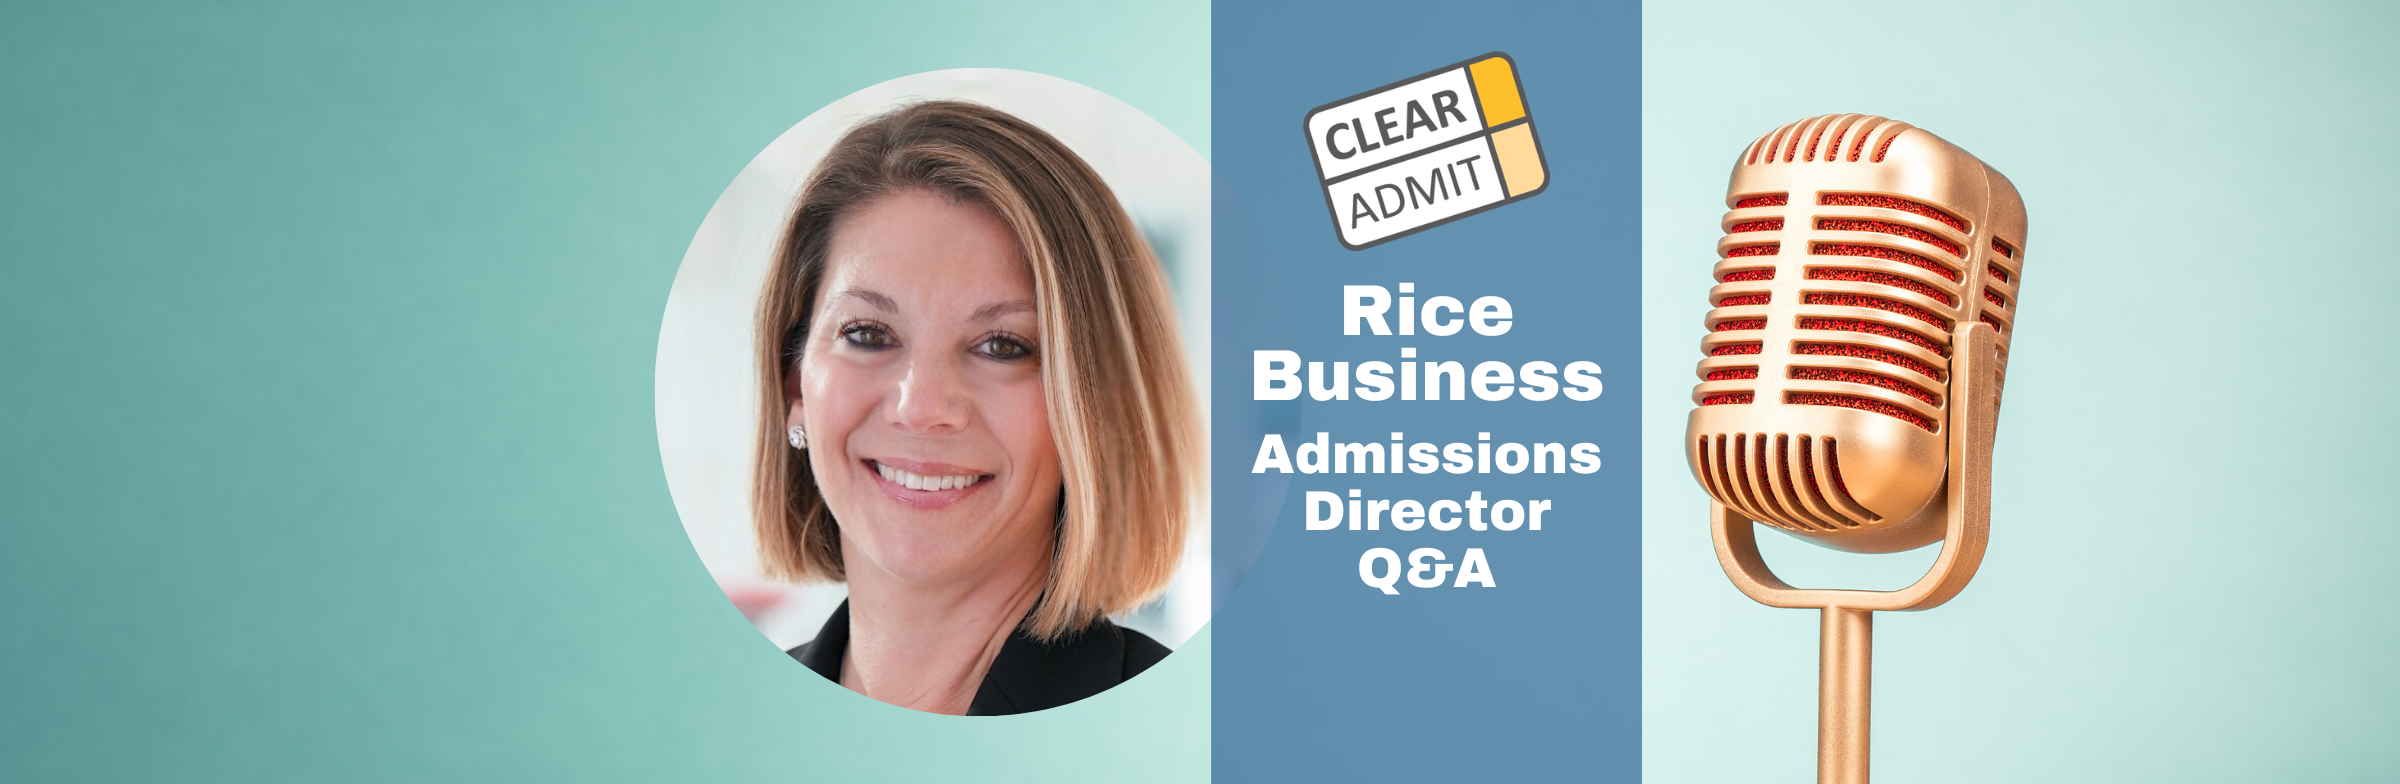 Image for Admissions Director Q&A: Coni Zingarelli of Rice Business